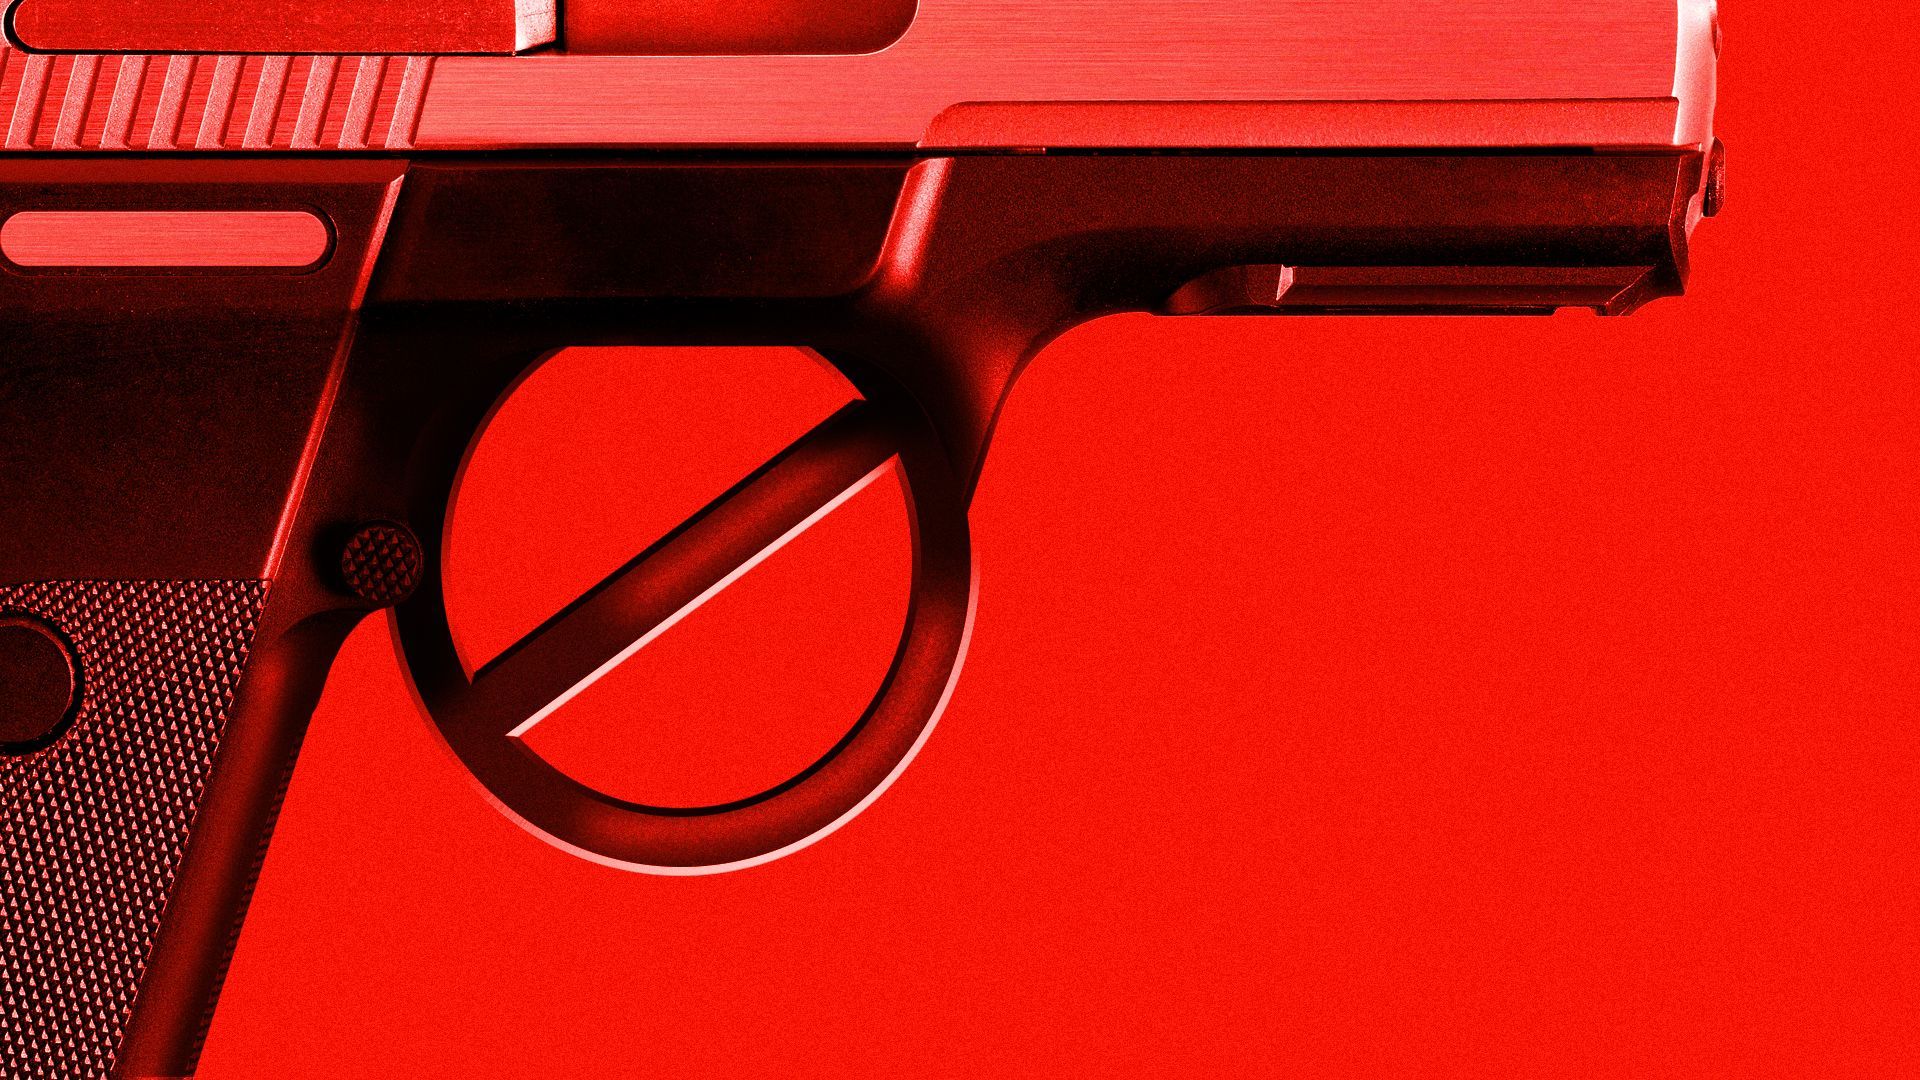 Illustration of a gun with a "no" symbol for a trigger